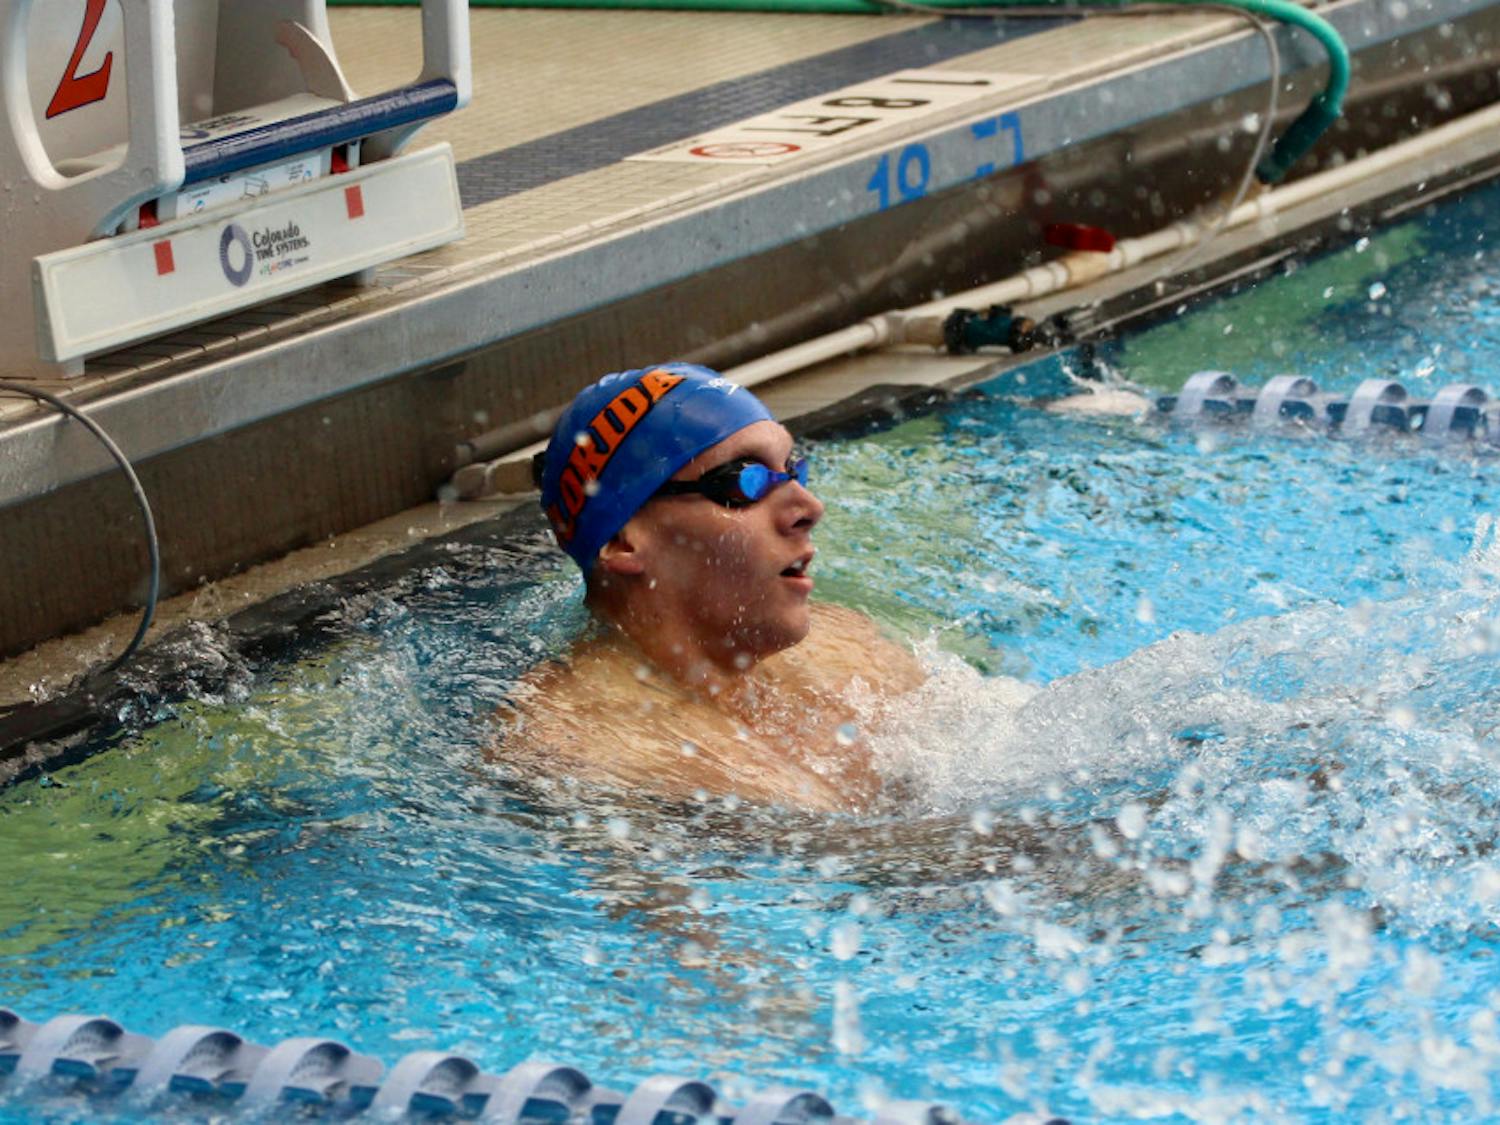 Caeleb Dressel showed off in front of a sell-out crowd on Senior Day, winning the 100-yard butterfly by .36 seconds and the 50-yard freestyle by .55 seconds. He was also part of both men's relay wins. 